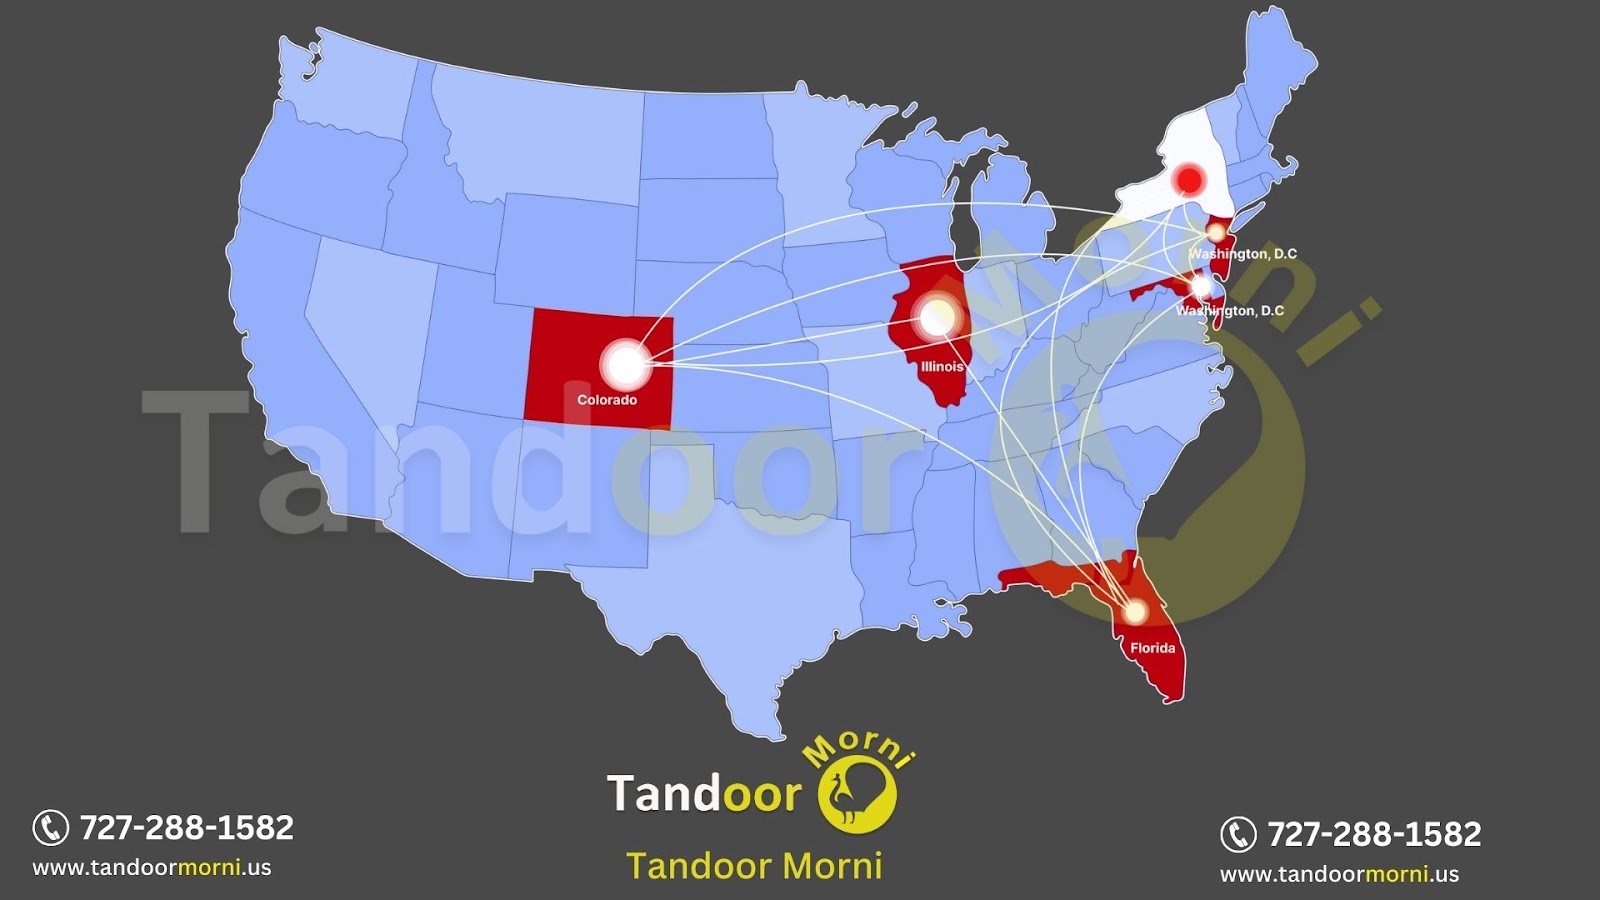 The pictures depict offices for Tandoor Morni in Colorado, New Jersey, Illinois, and Florida. New Jersey is quite close to New York, and Tandoor for Sale in New York is more dependable and faster to deliver.